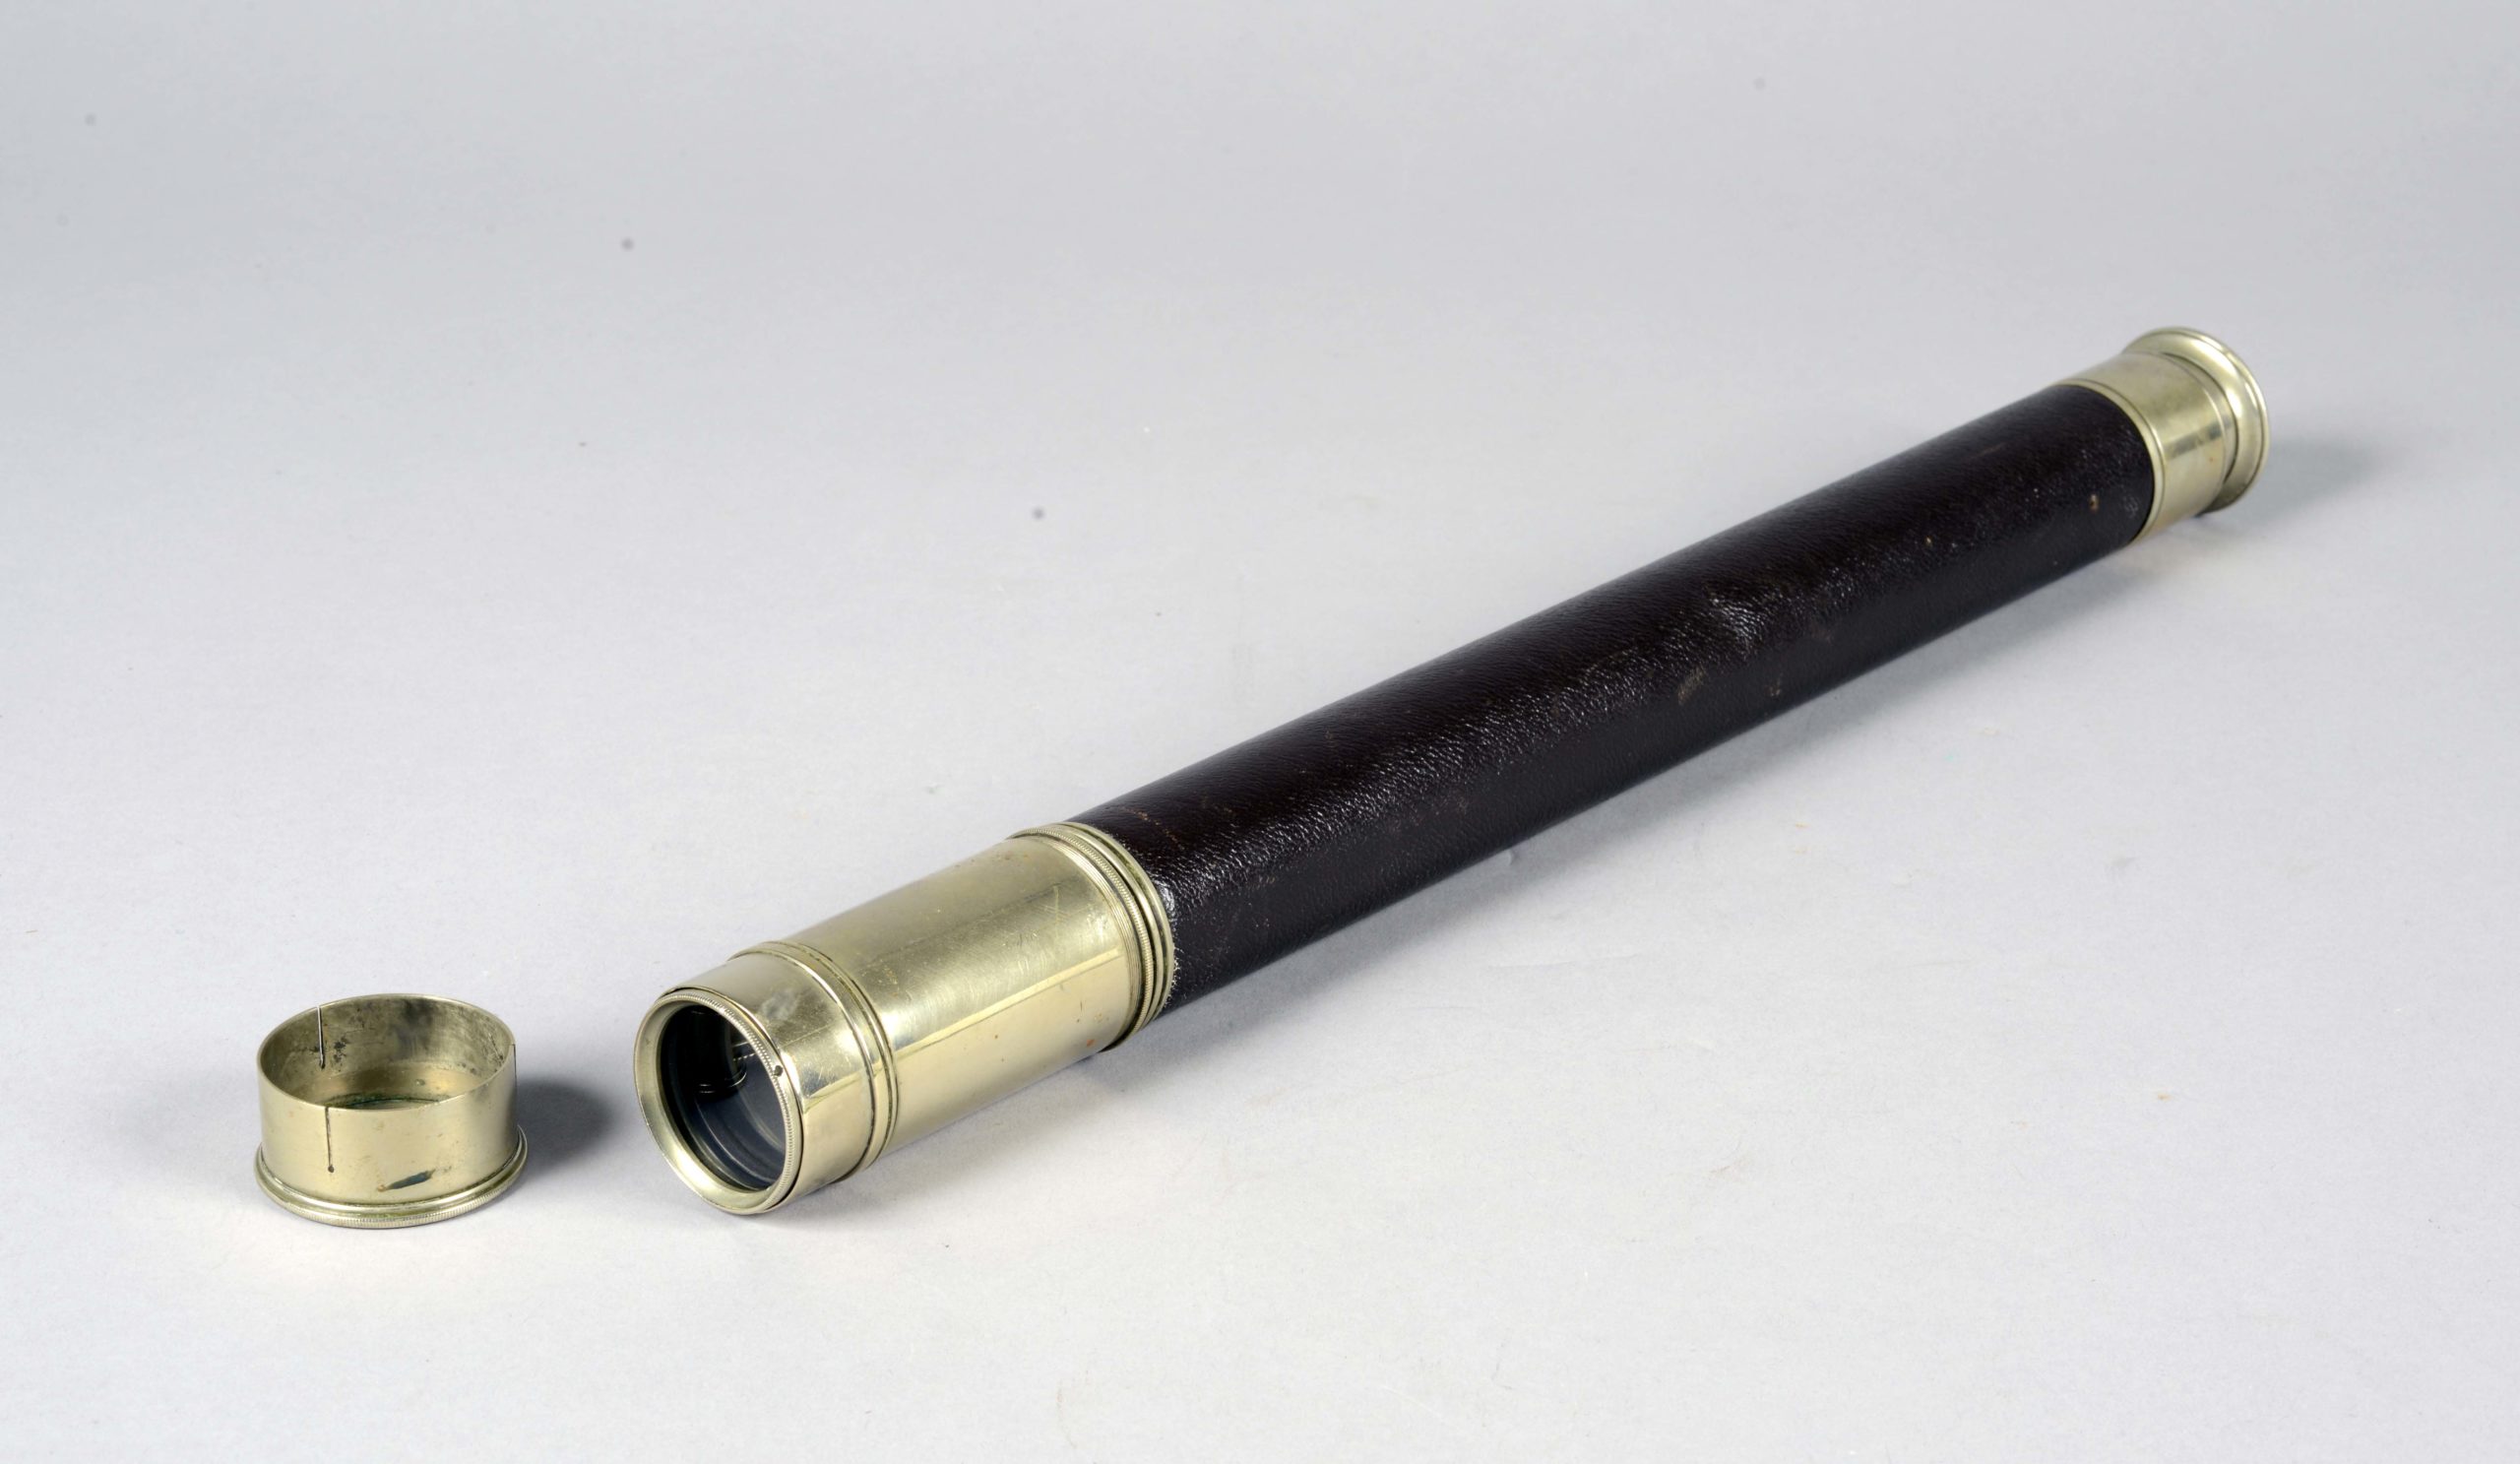 Telescope with leather bound body belonging to Lieutenant Bruce. Engraved on the sliding bar are the words: ‘D.F.F. Bruce’. Lieutenant Bruce was the Navigation Officer on the Cable Ship Iris.